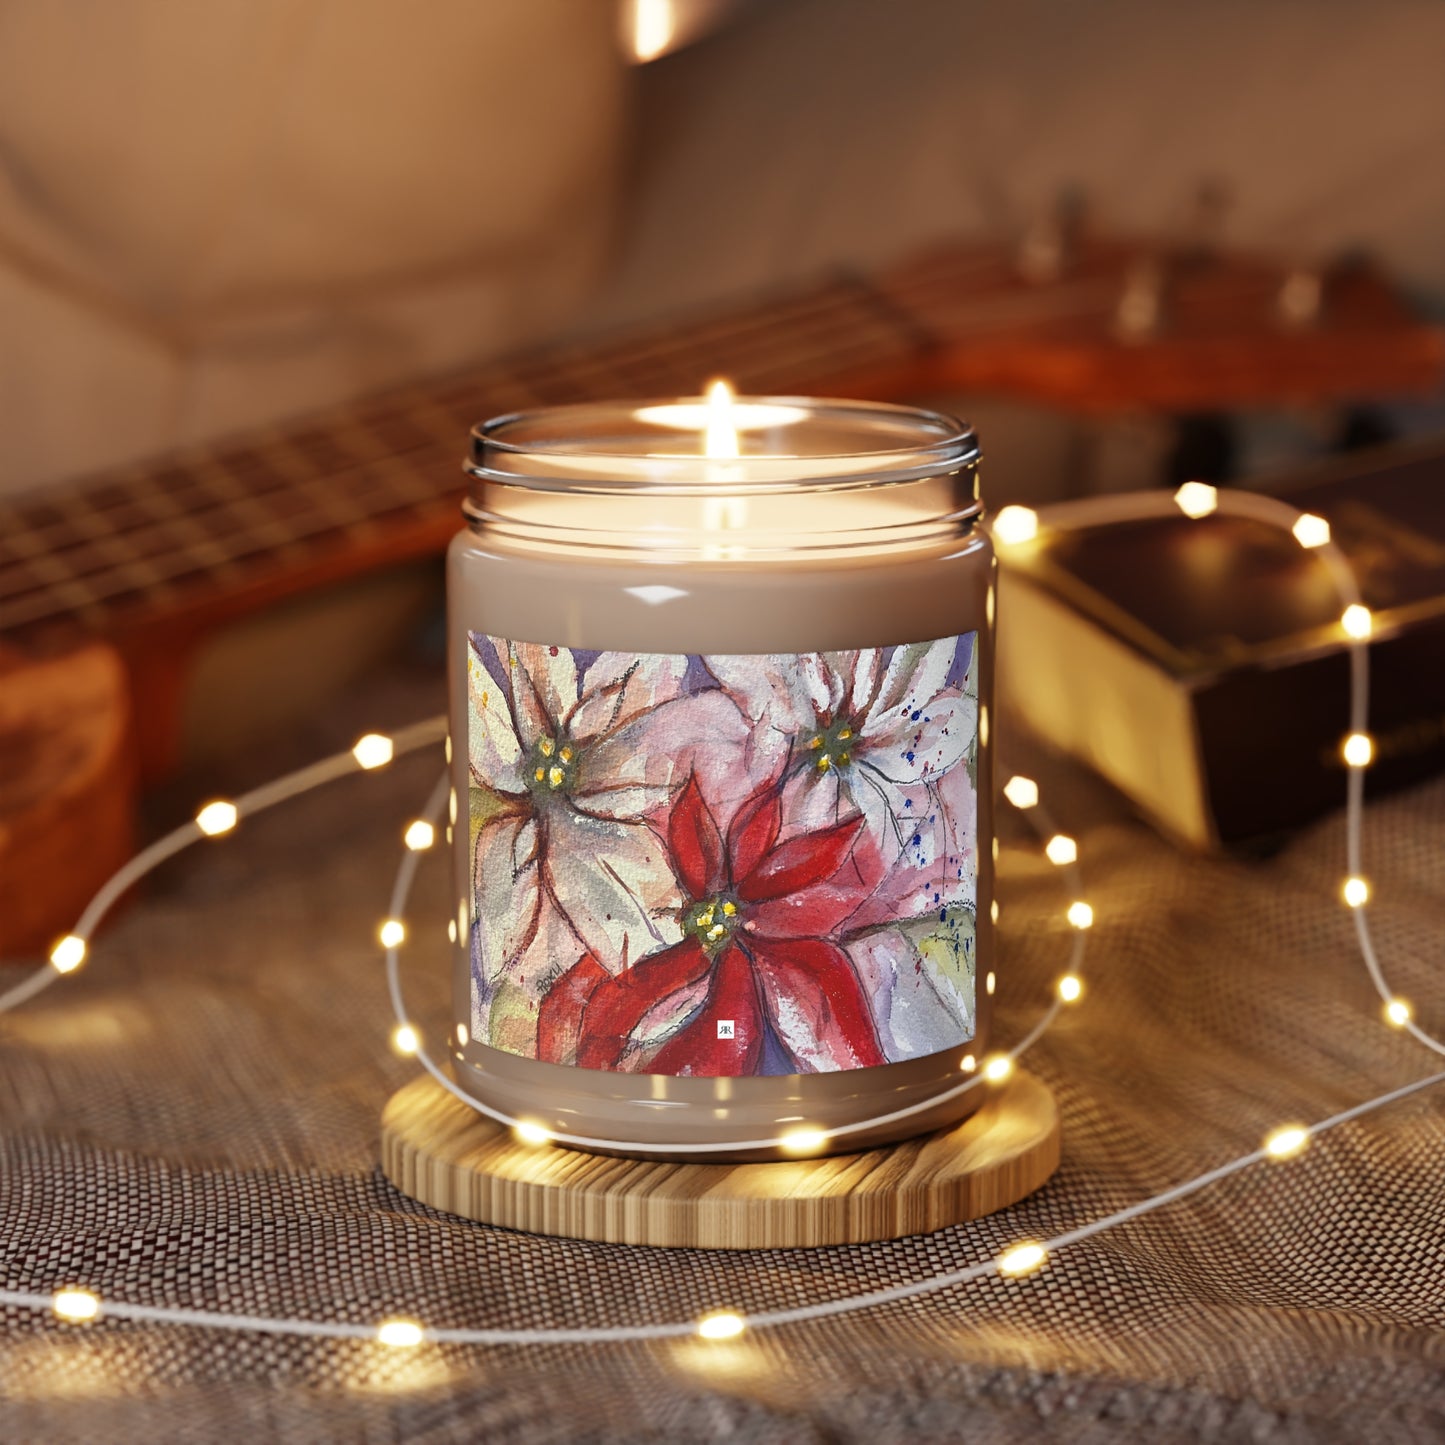 Poinsettias Scented Candle 9oz